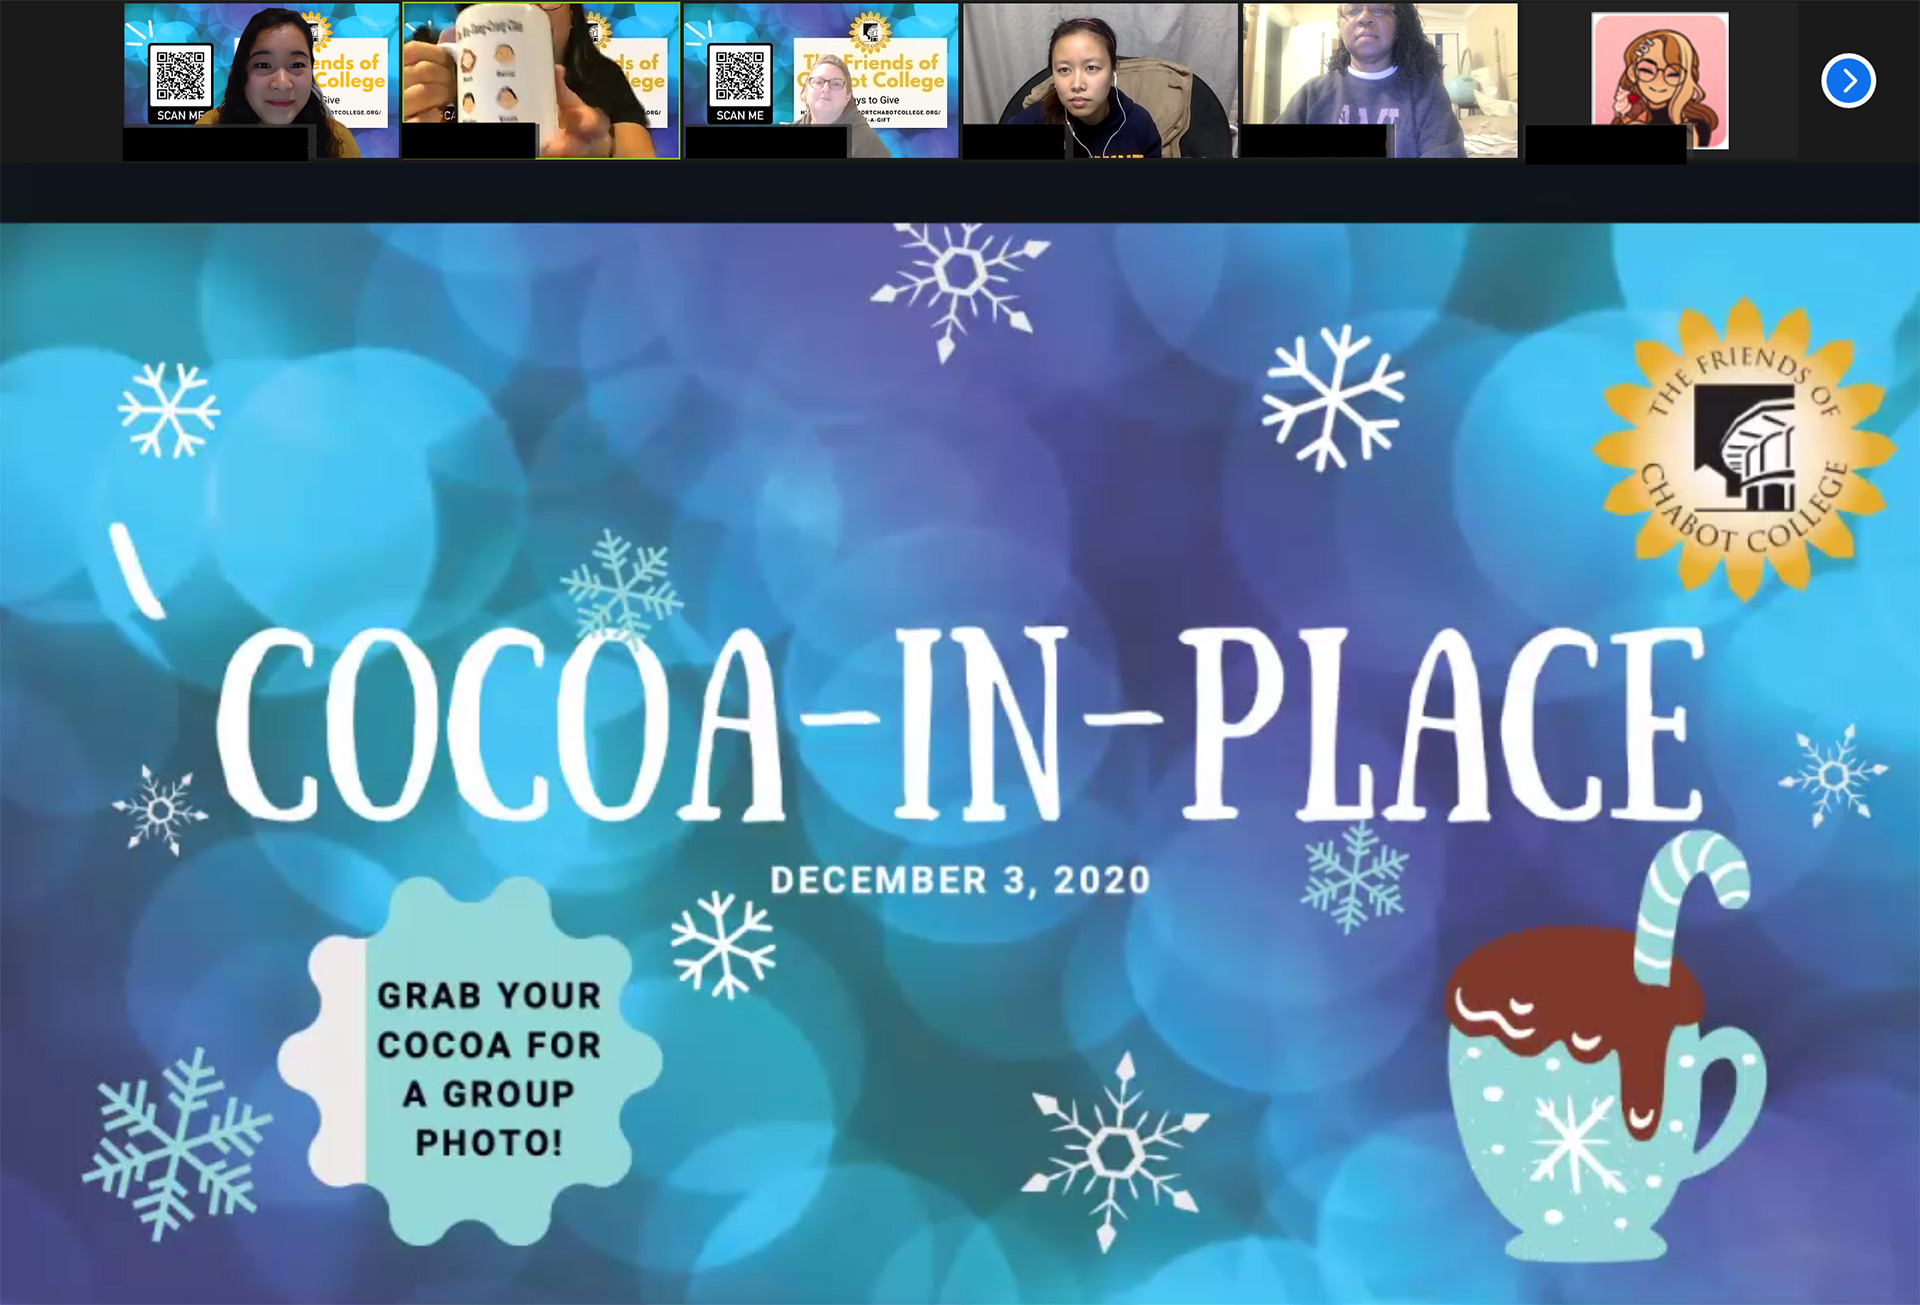 Cocoa-in-Place